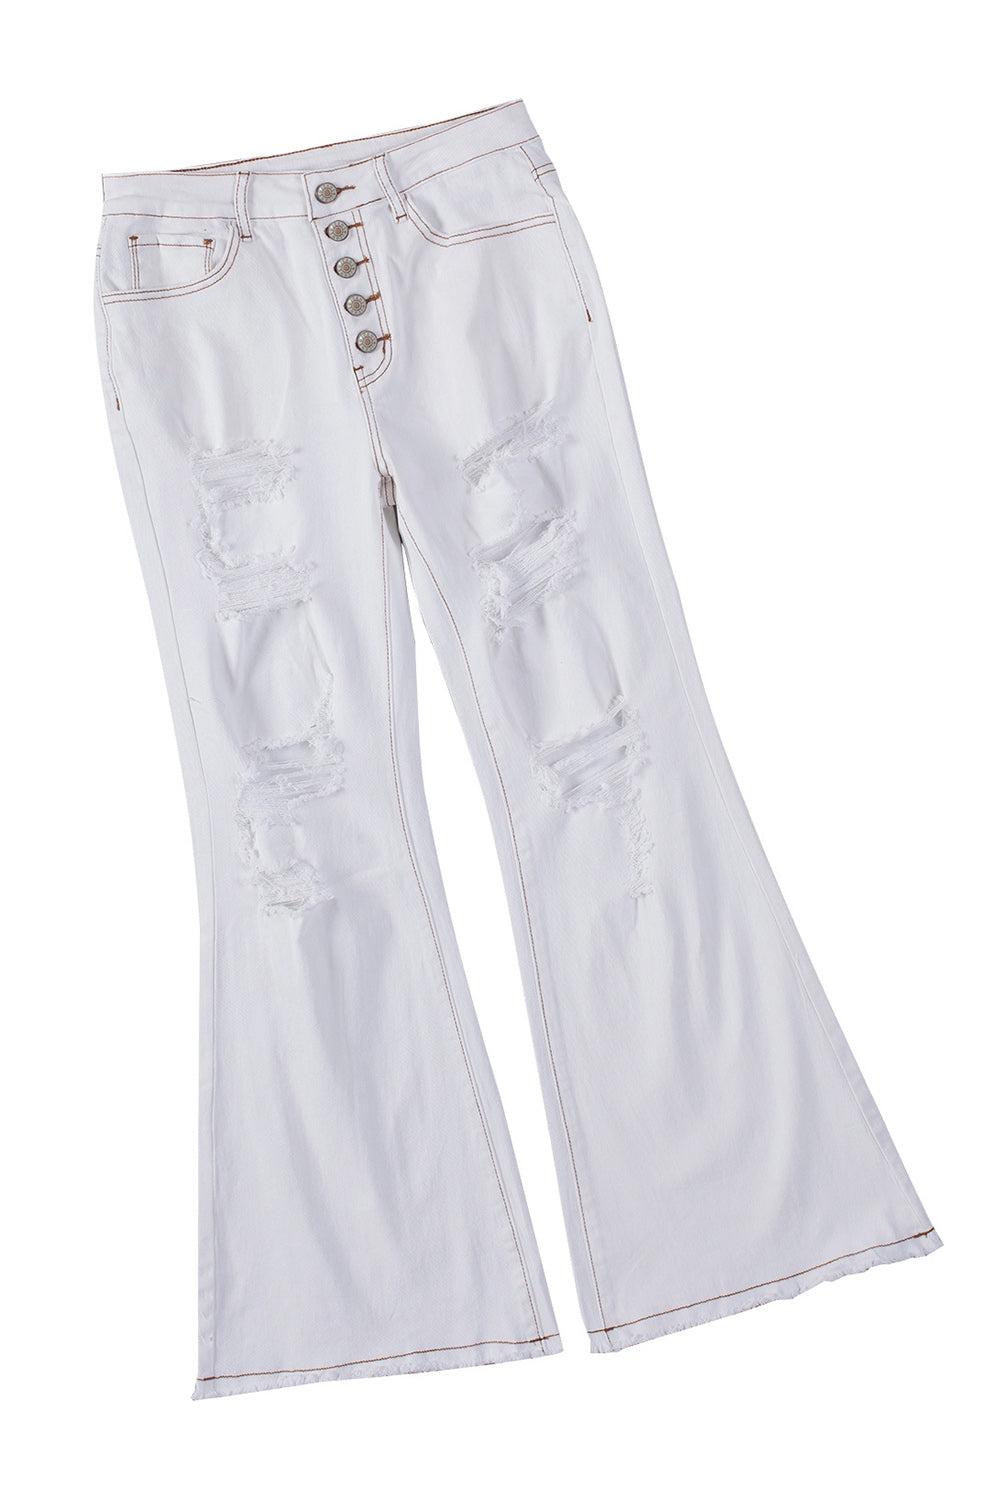 White Light Washed Distressed Slits Button Fly Flare Jeans